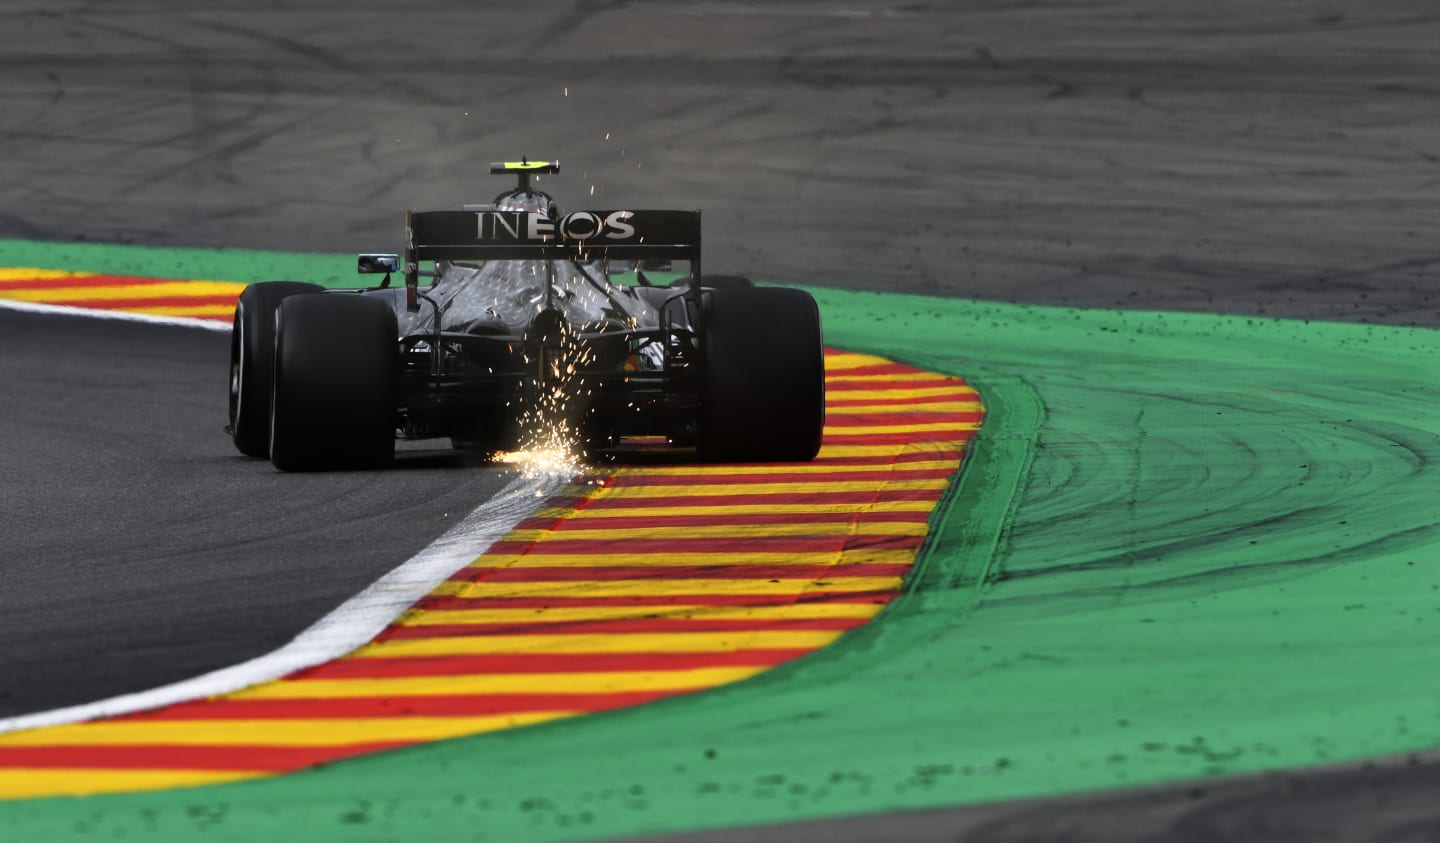 SPA, BELGIUM - AUGUST 28: Valtteri Bottas of Finland driving the (77) Mercedes AMG Petronas F1 Team Mercedes W11 drives during practice for the F1 Grand Prix of Belgium at Circuit de Spa-Francorchamps on August 28, 2020 in Spa, Belgium. (Photo by Rudy Carezzevoli/Getty Images)